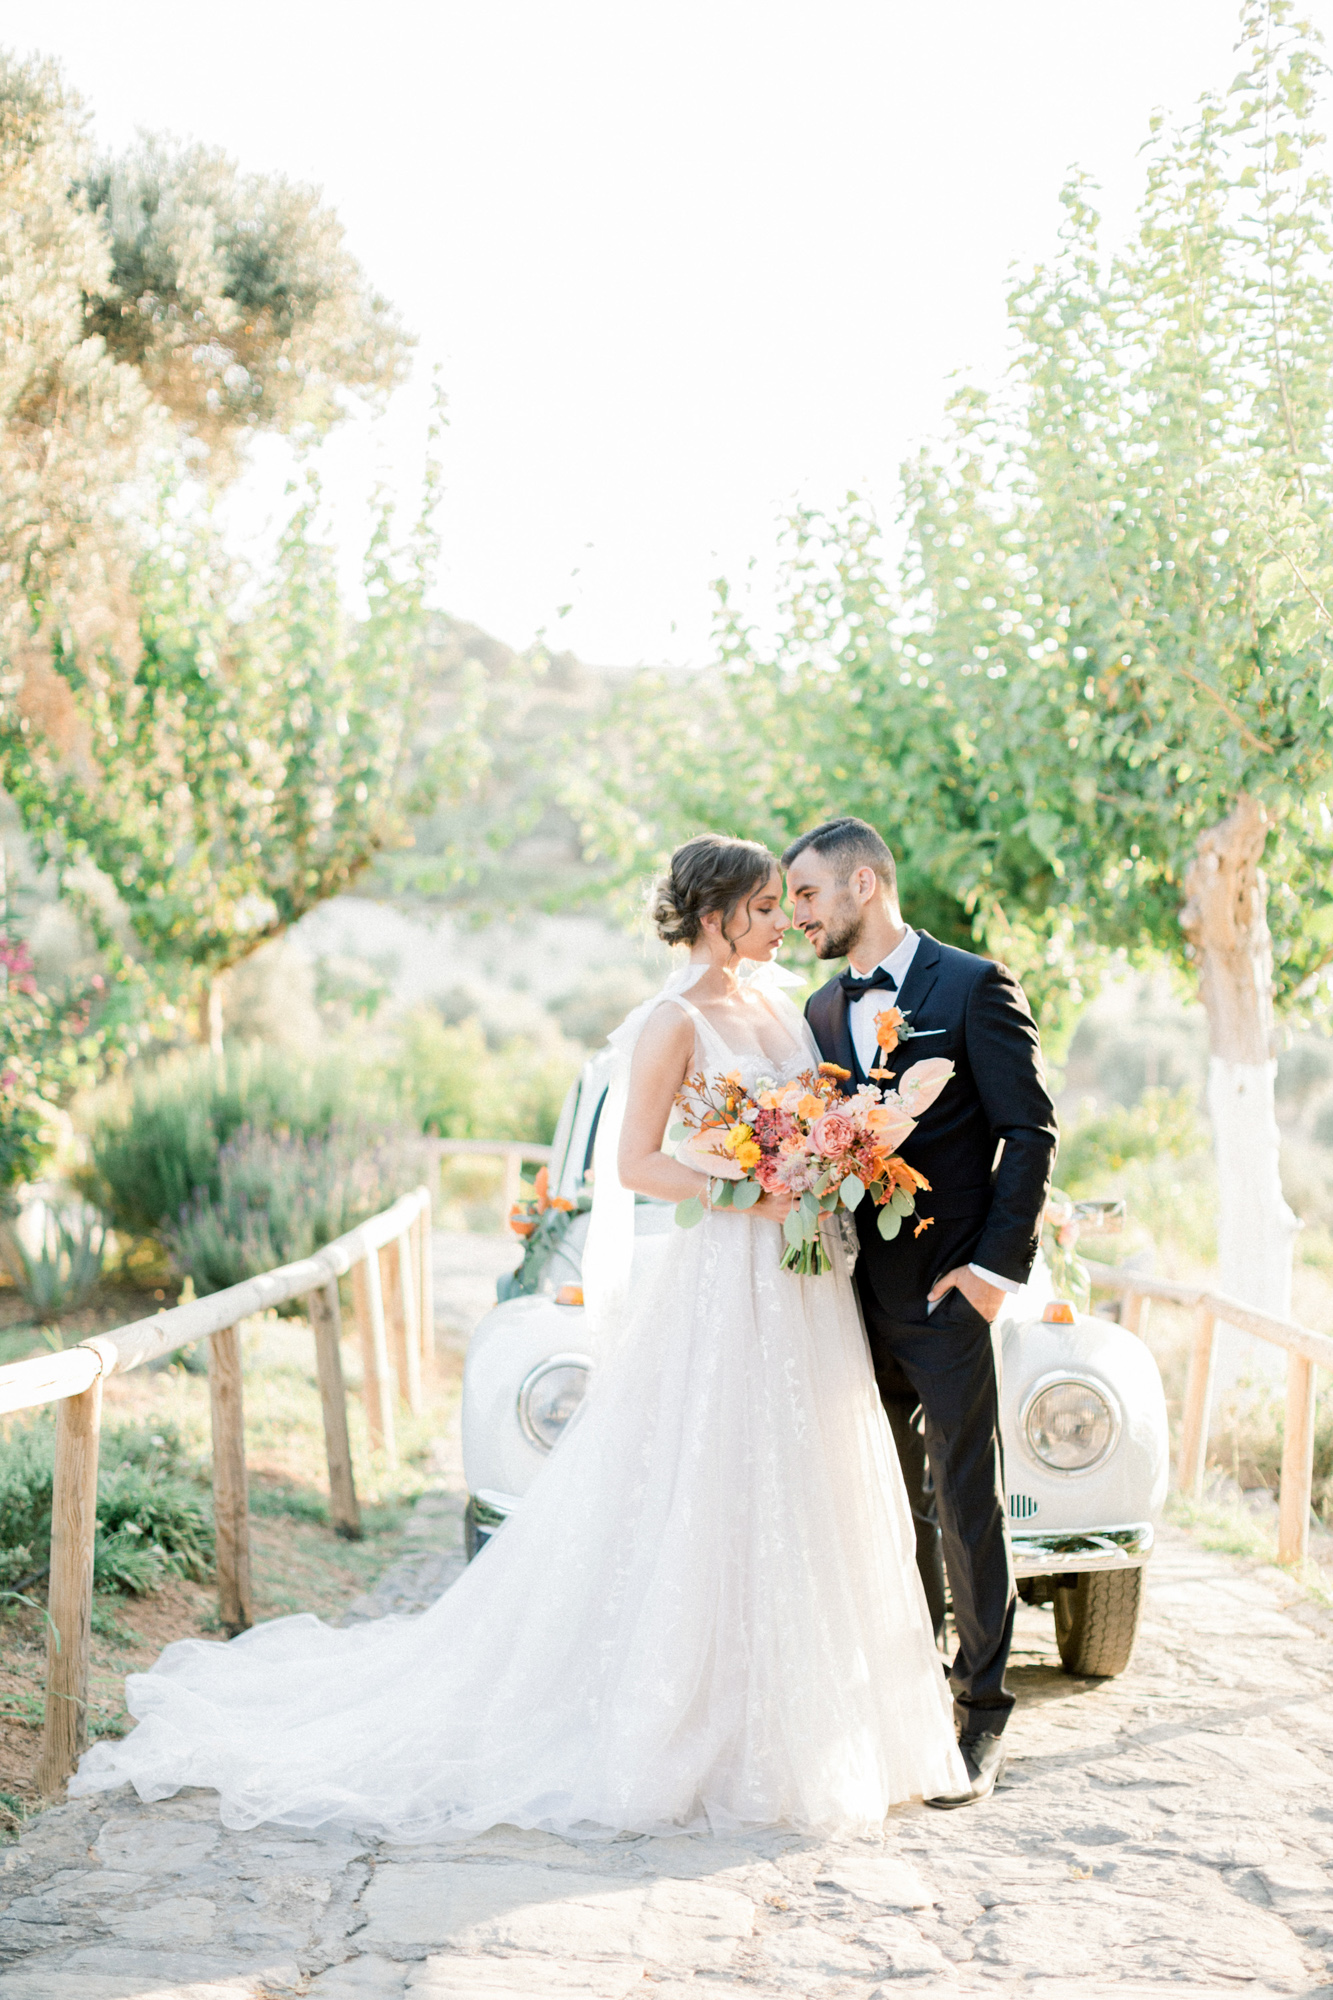 Beautiful bride and groom posing together for a sunset wedding editorial in Grecotel Agreco Farms Crete Greece as published on Ruffled blog.